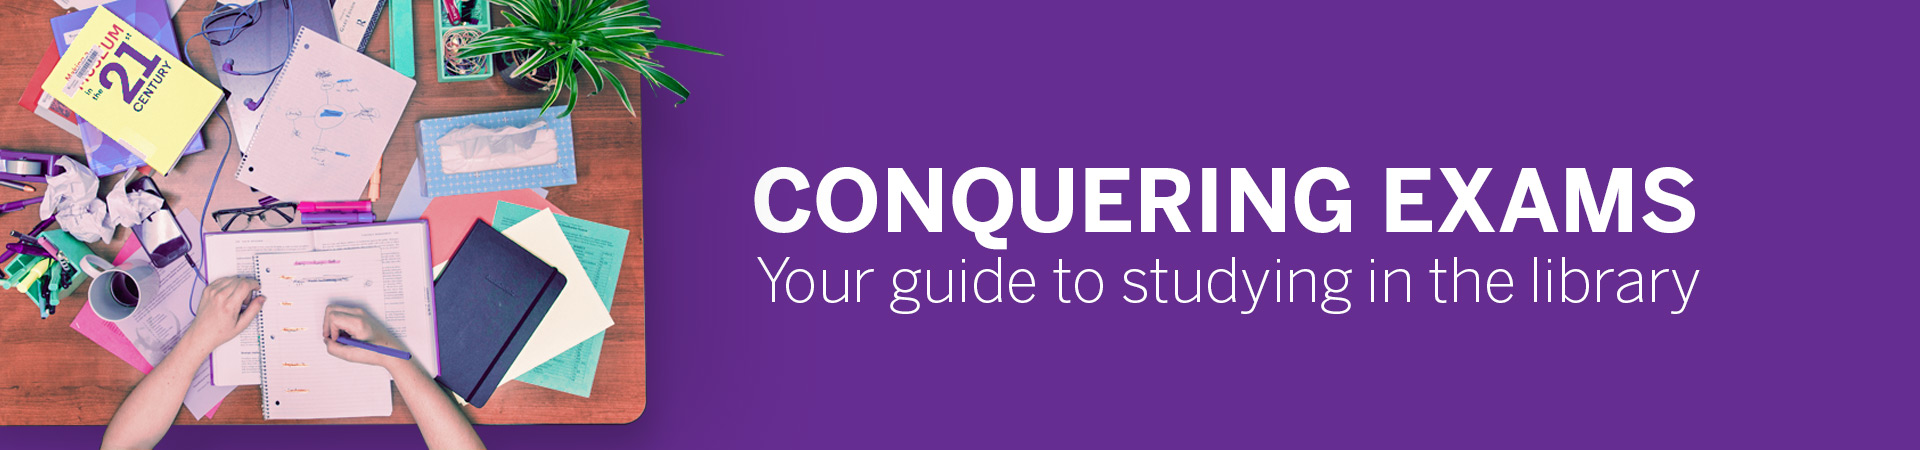 Conquering Exams - Your guide to studying in the library